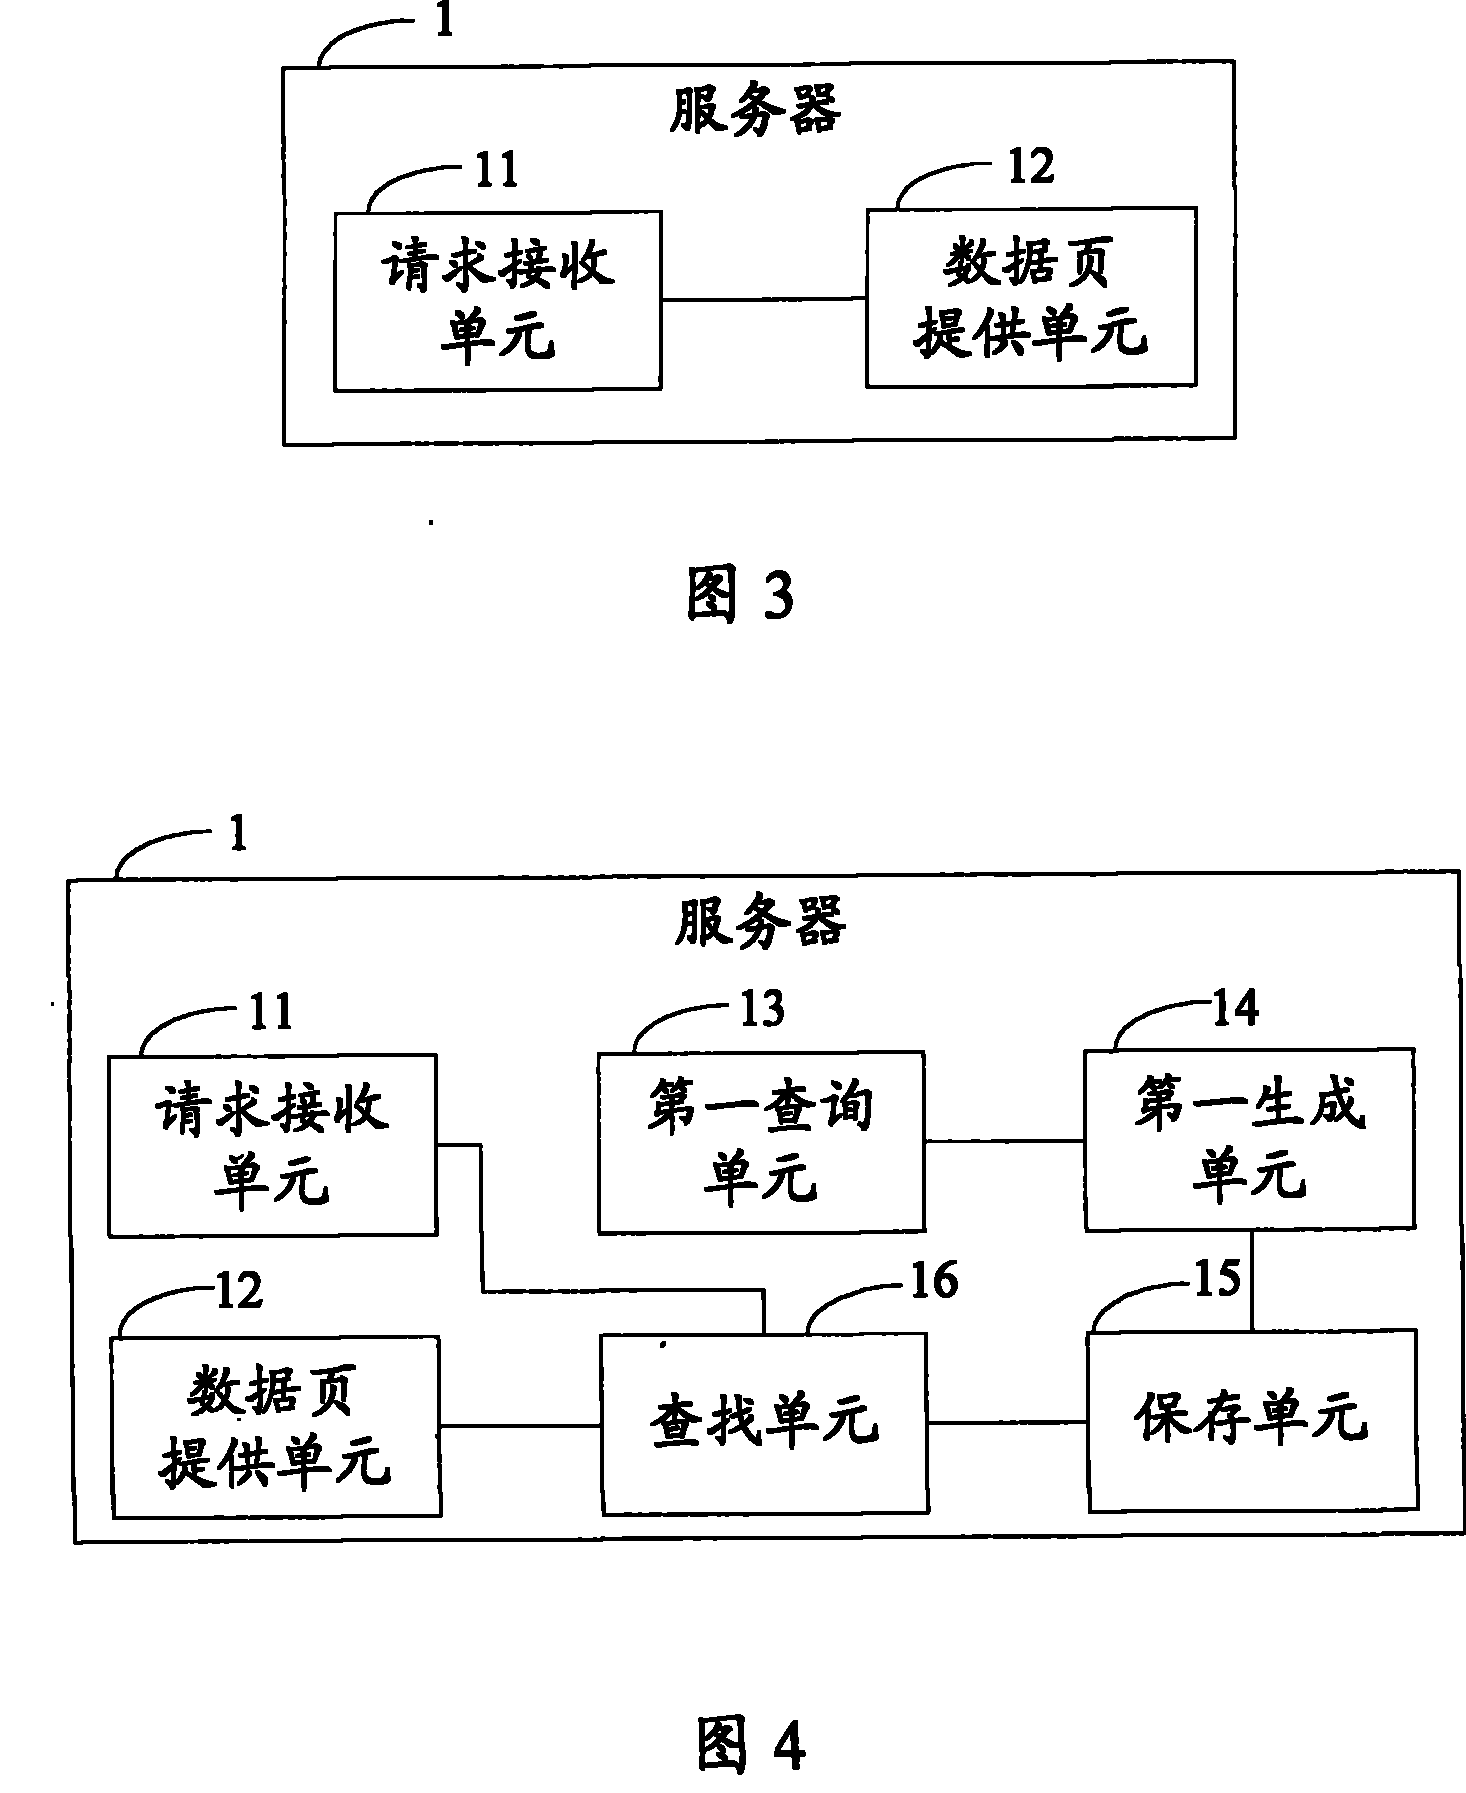 Method, device and system for providing and altering data on network page